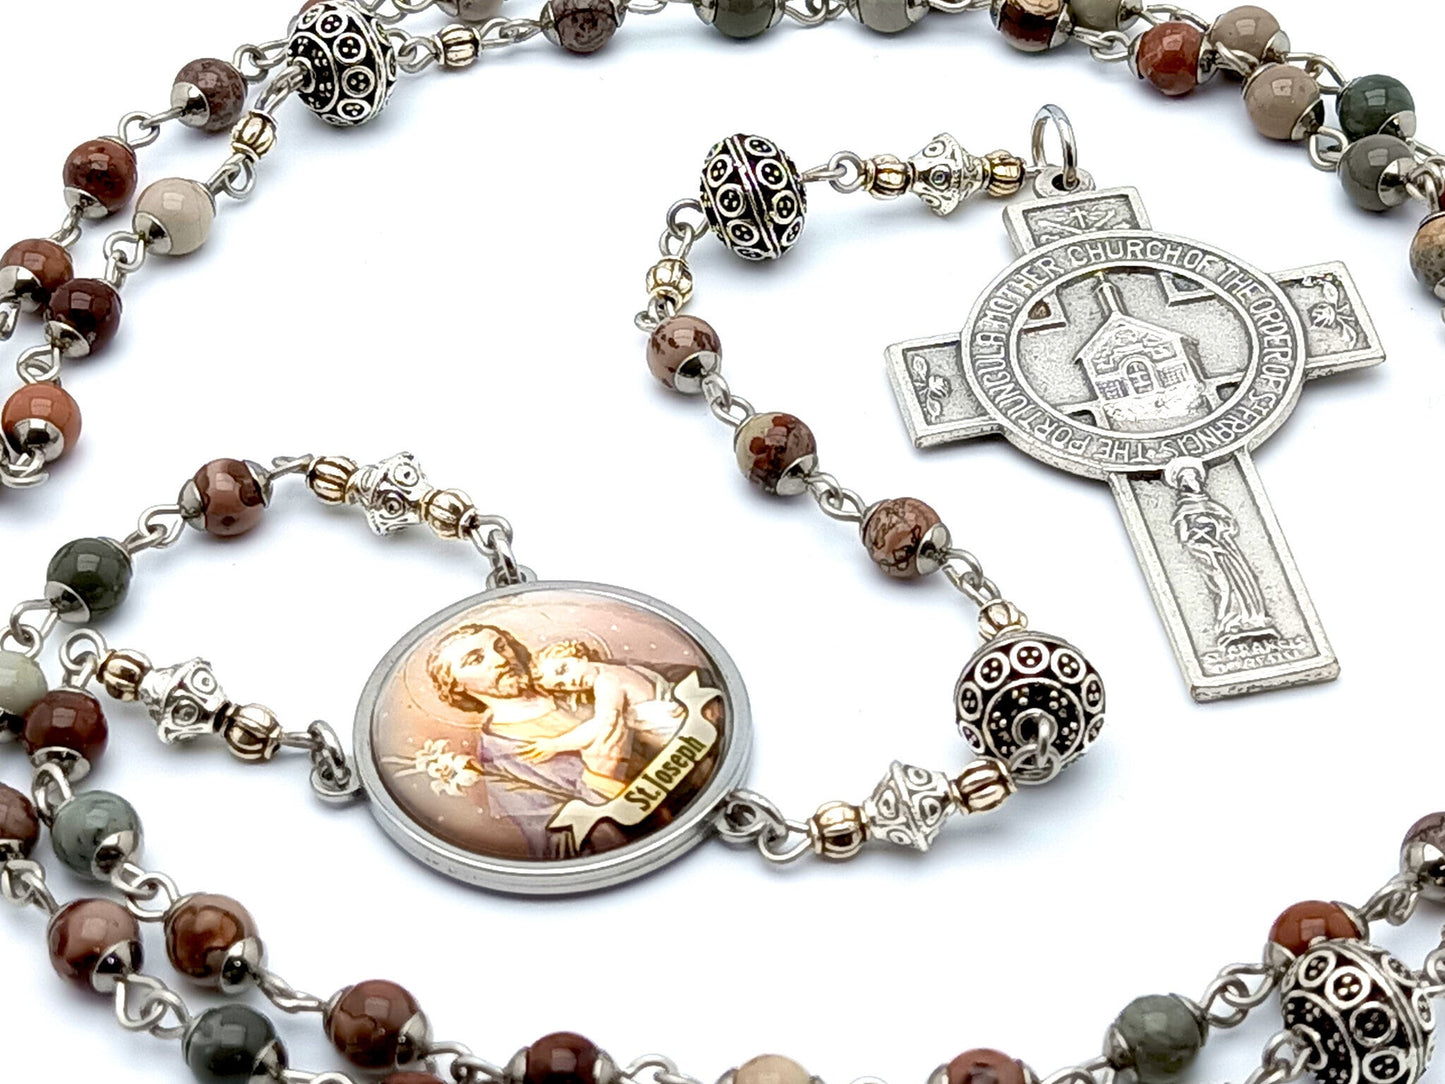 Saint Joseph unique rosary beads with jasper gemstone and silver beads, Portiuncula Assisi cross and picture centre medal.